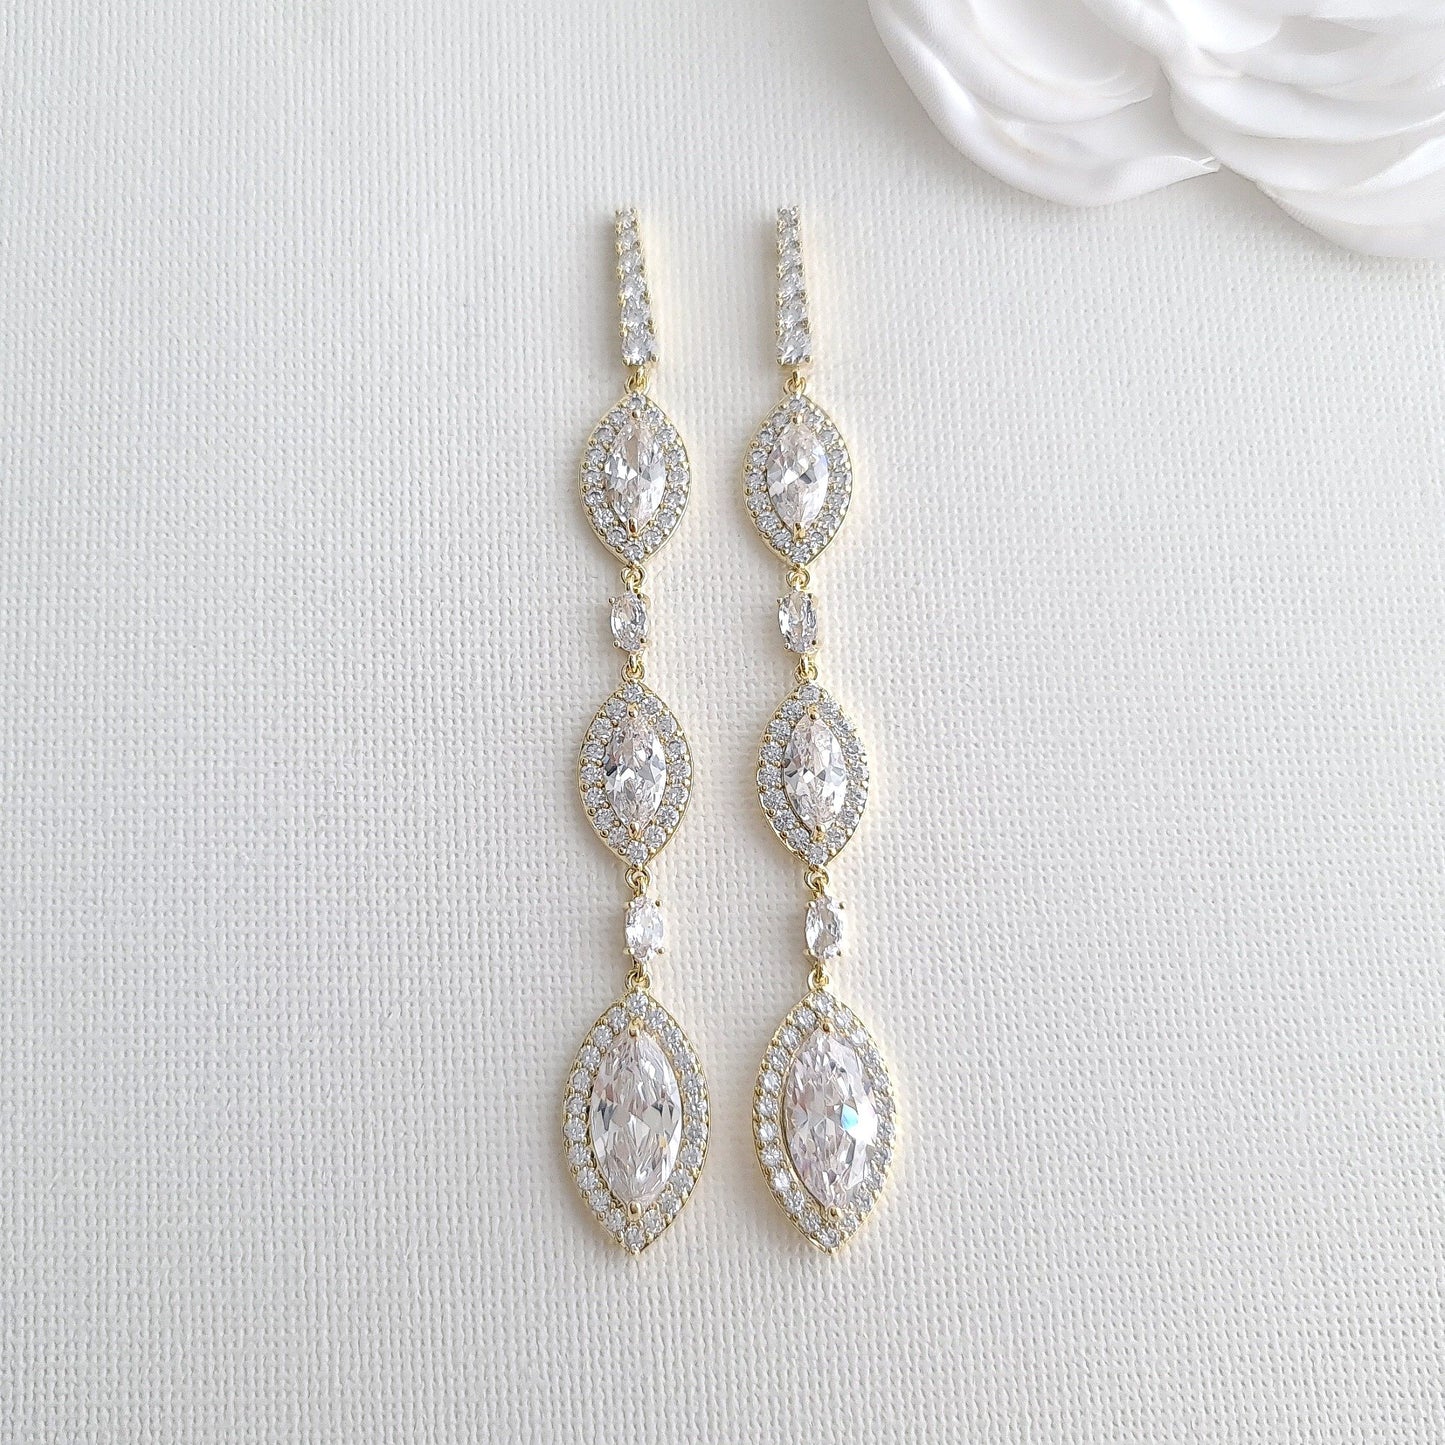 Extra Long Gold Earrings for Wedding and Prom-Poetry Designs